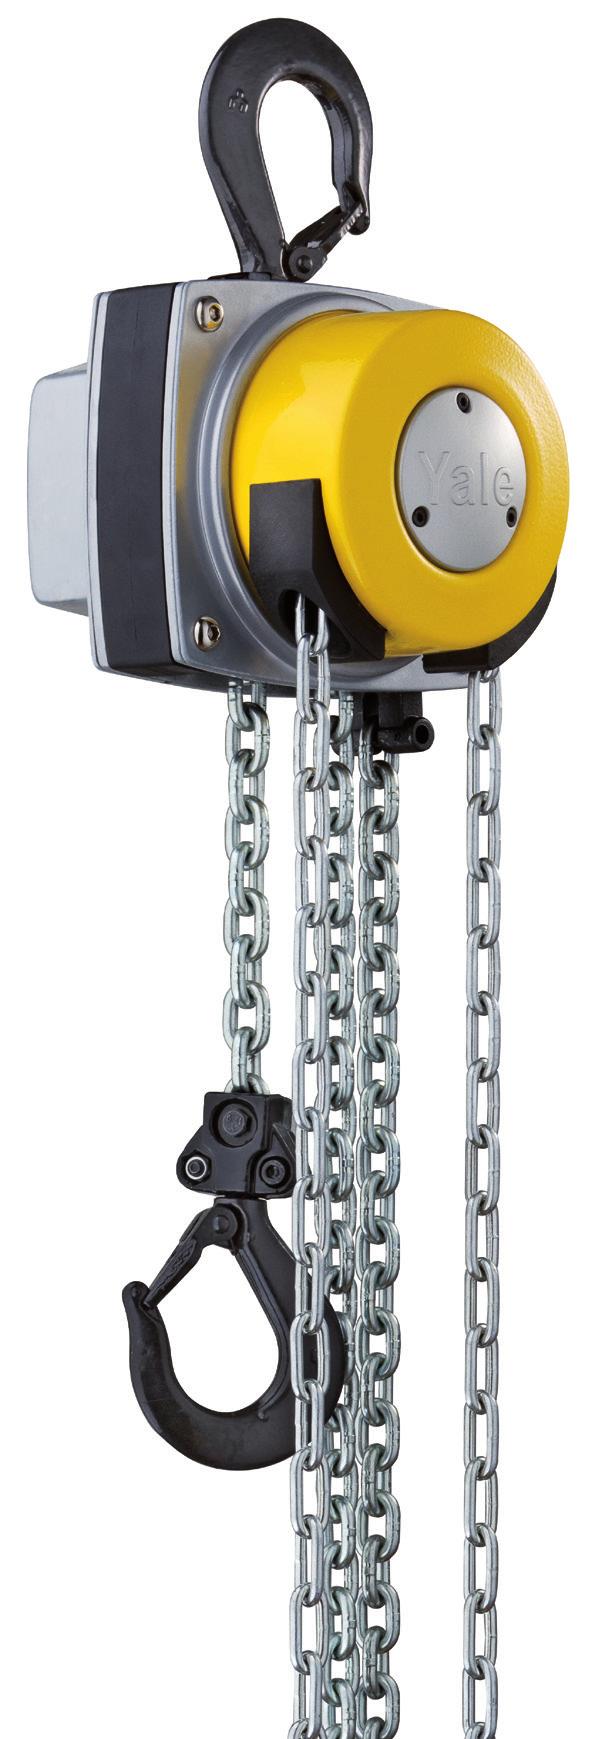 The revolutionary 360 rotating hand chain guide allows the operator to work from virtually any position, in confined spaces or above the load.